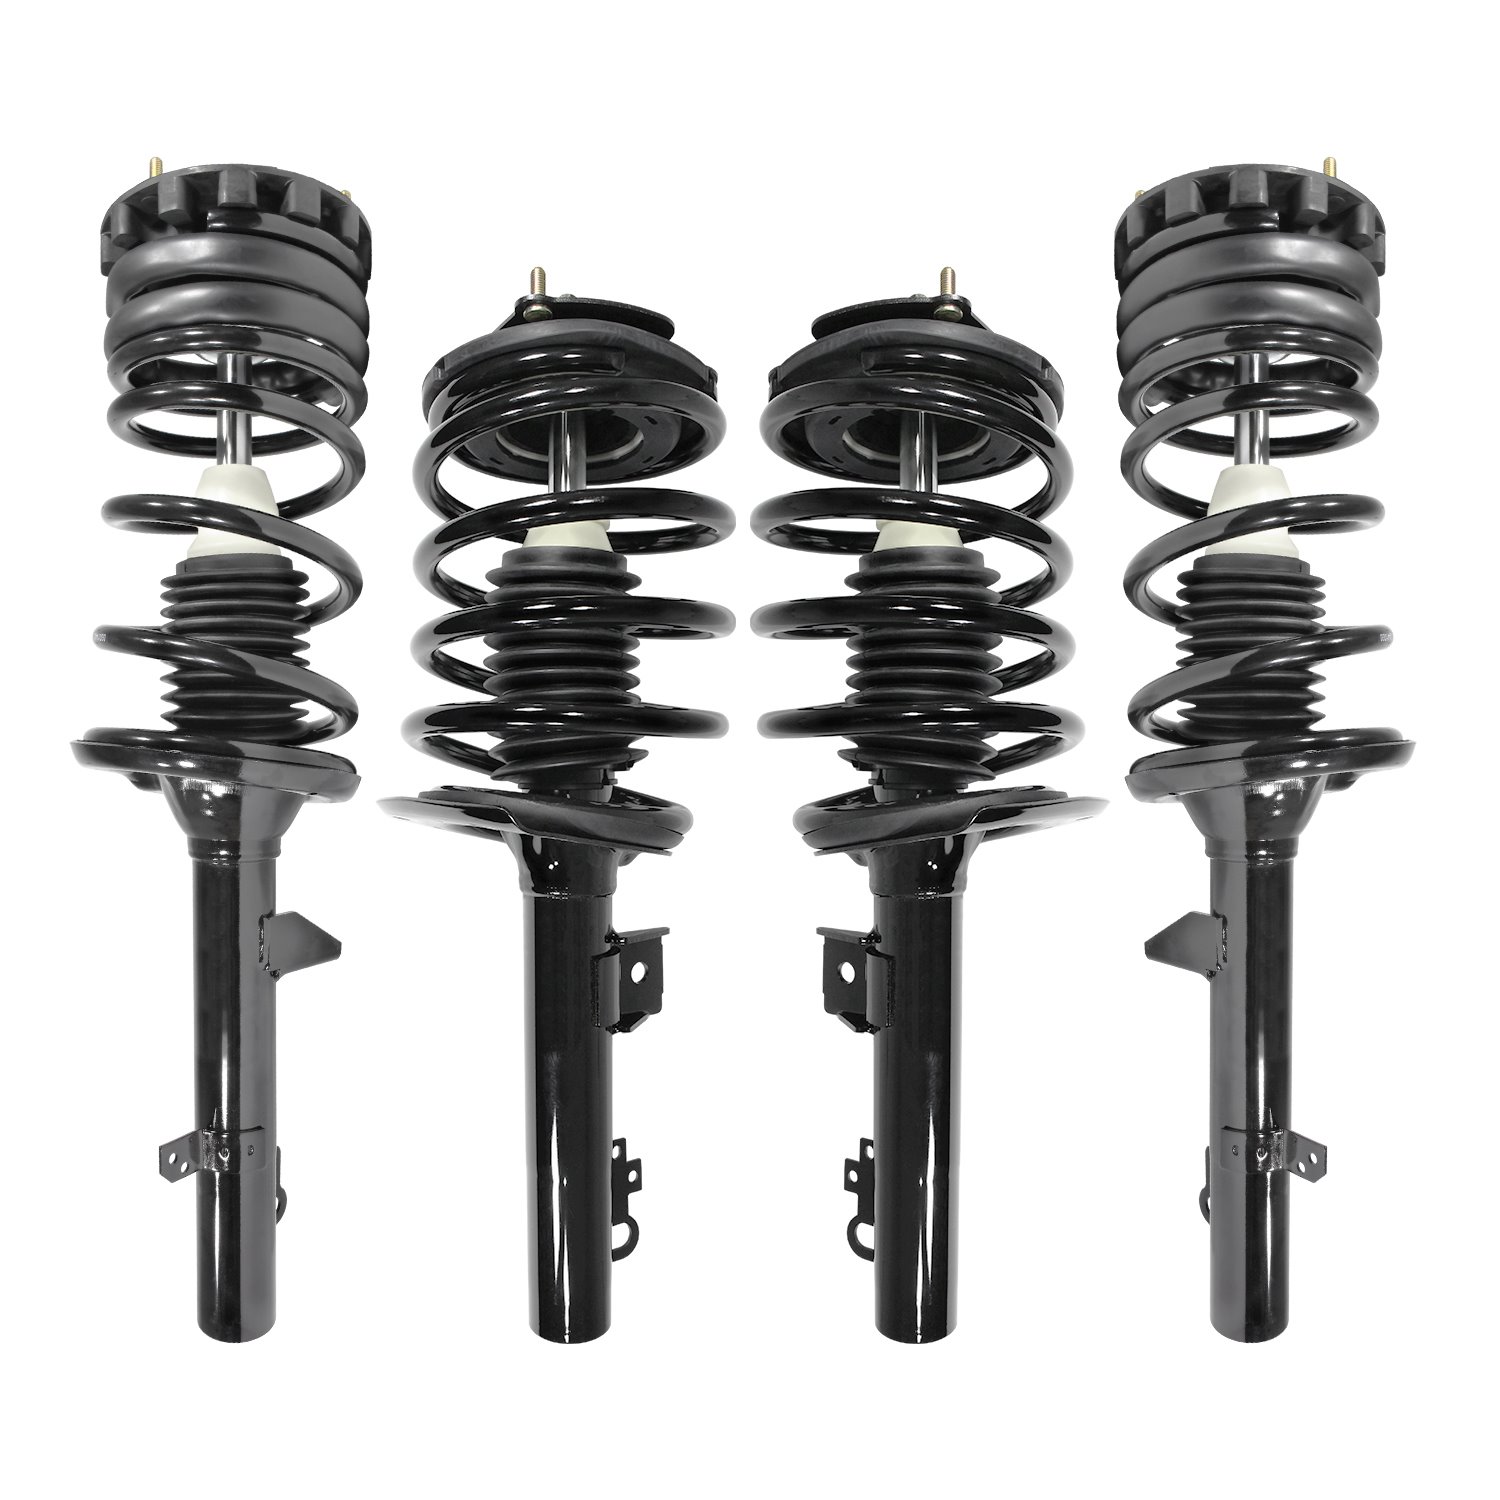 4-11010-15040-001 Front & Rear Suspension Strut & Coil Spring Assembly Kit Fits Select Ford Taurus, Mercury Sable